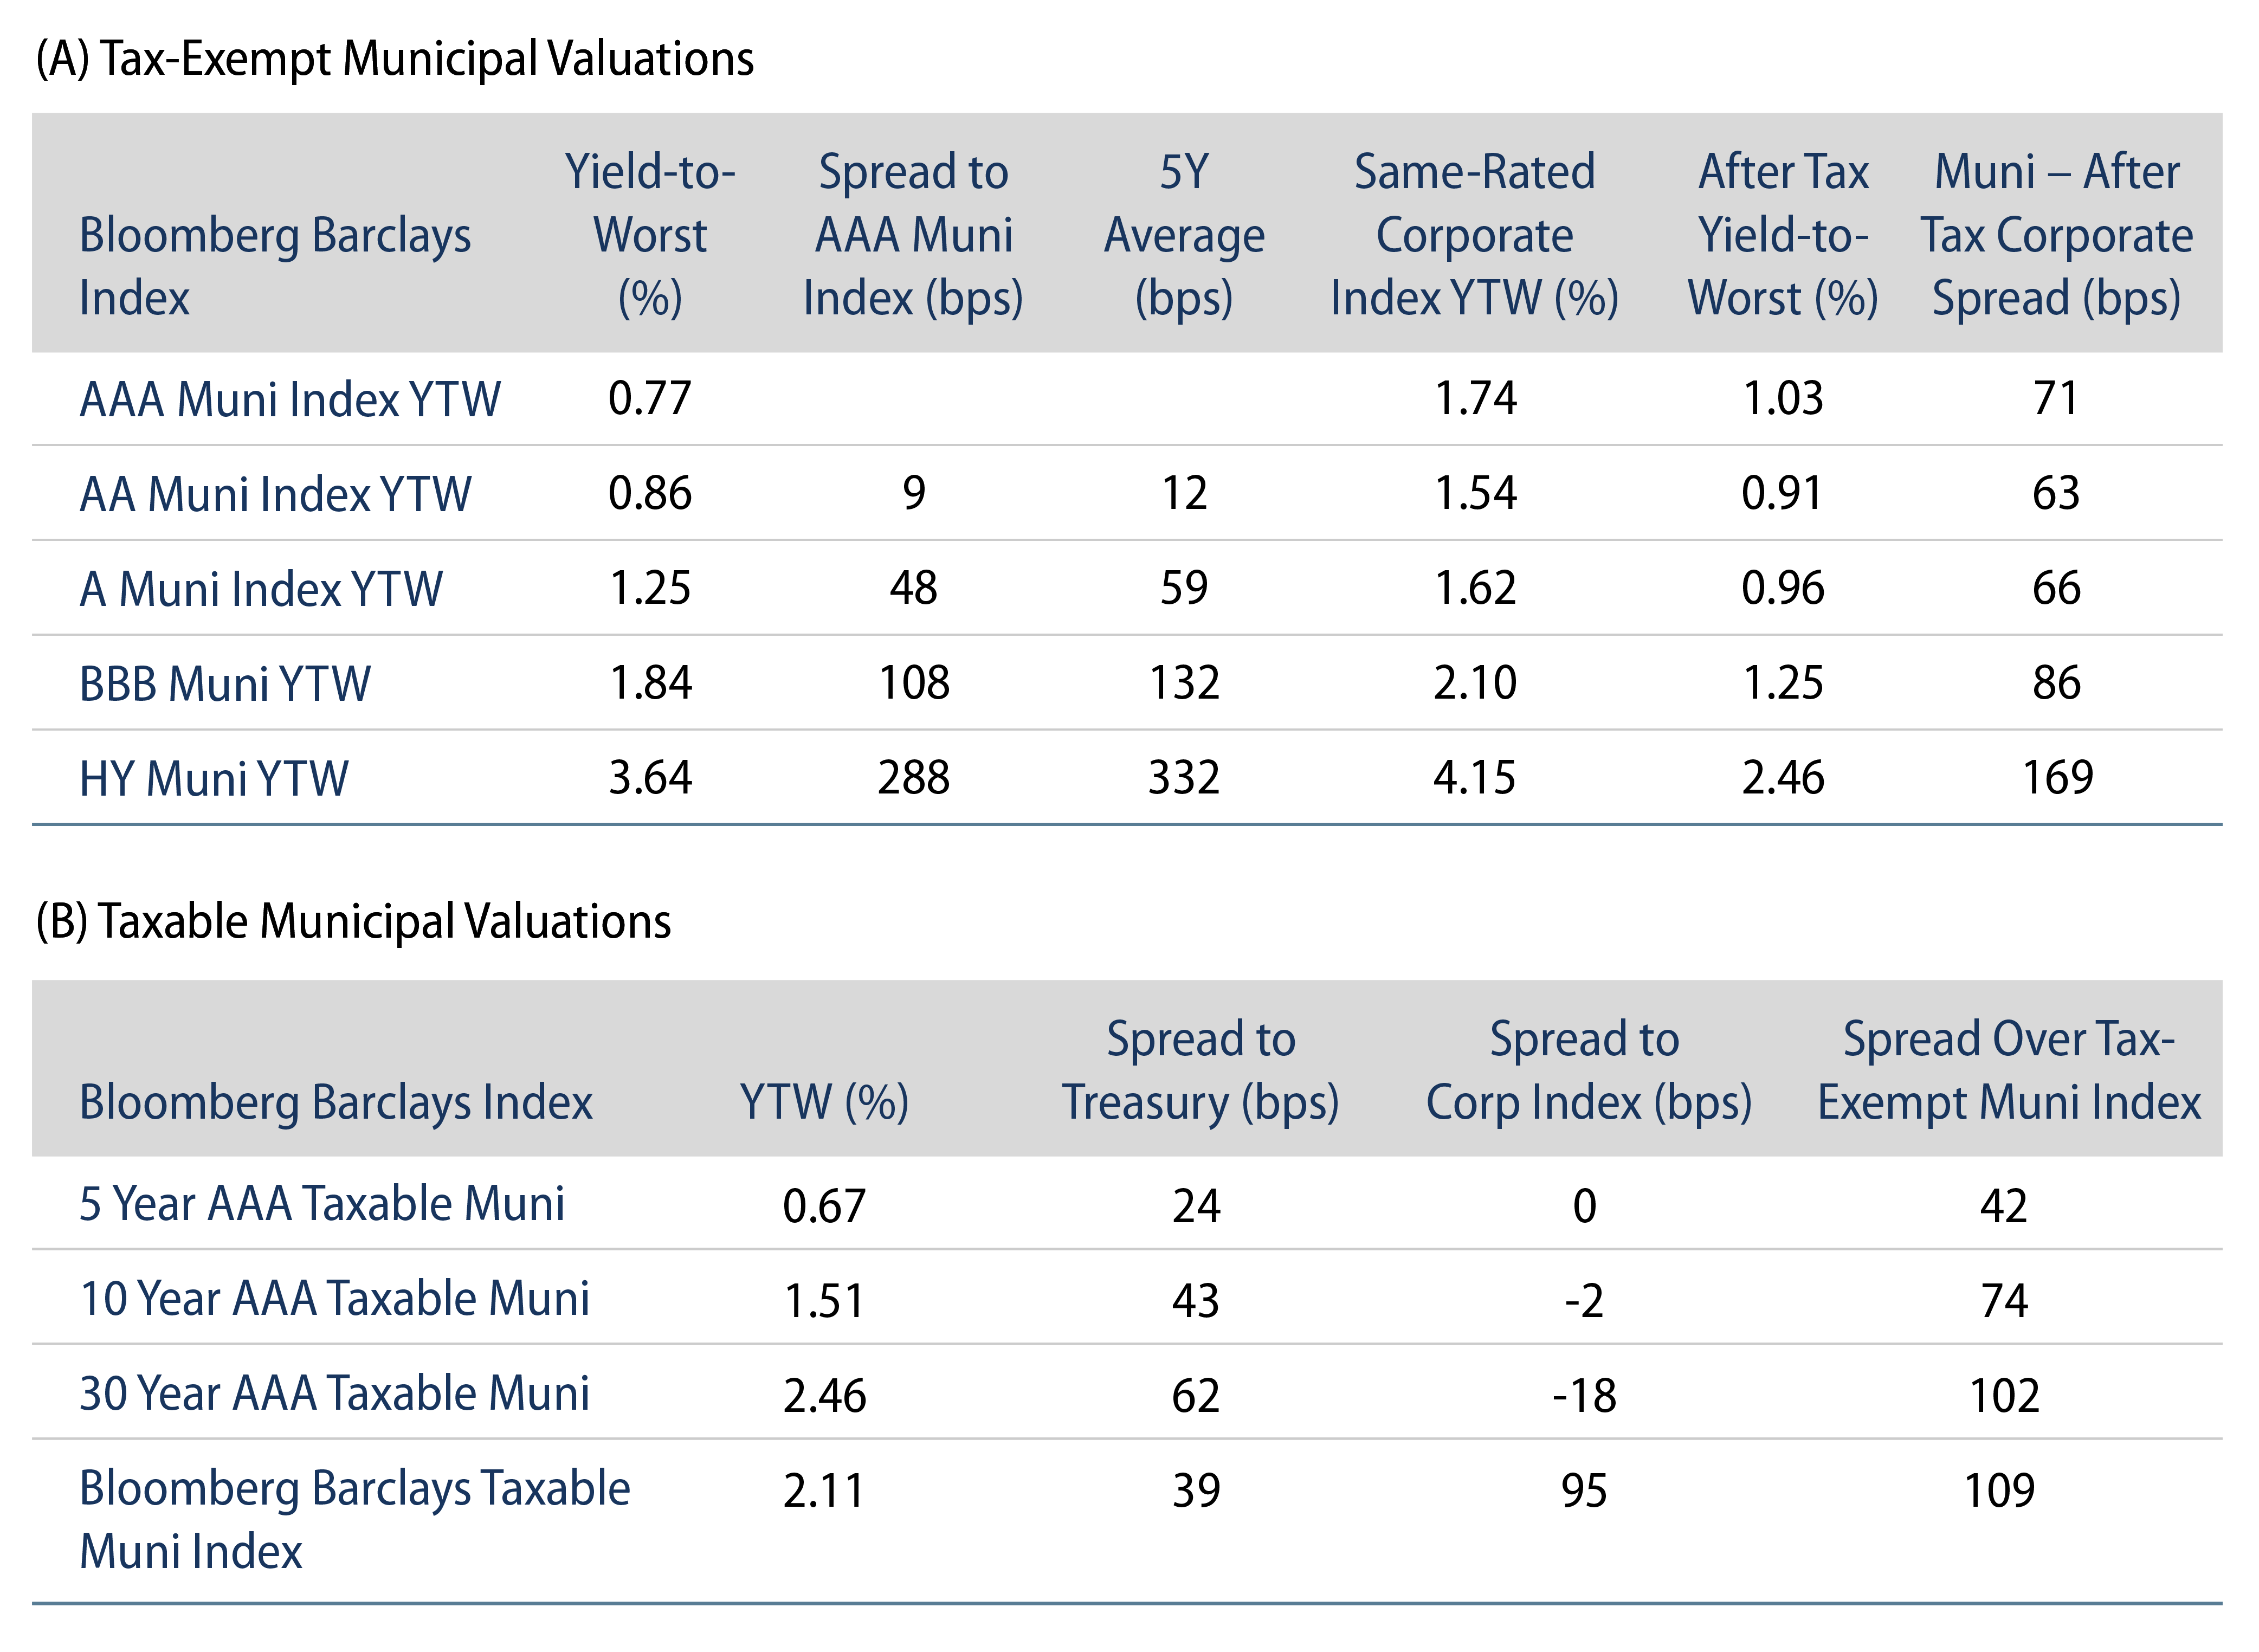 Explore Tax-Exempt and Taxable Municipal Valuations